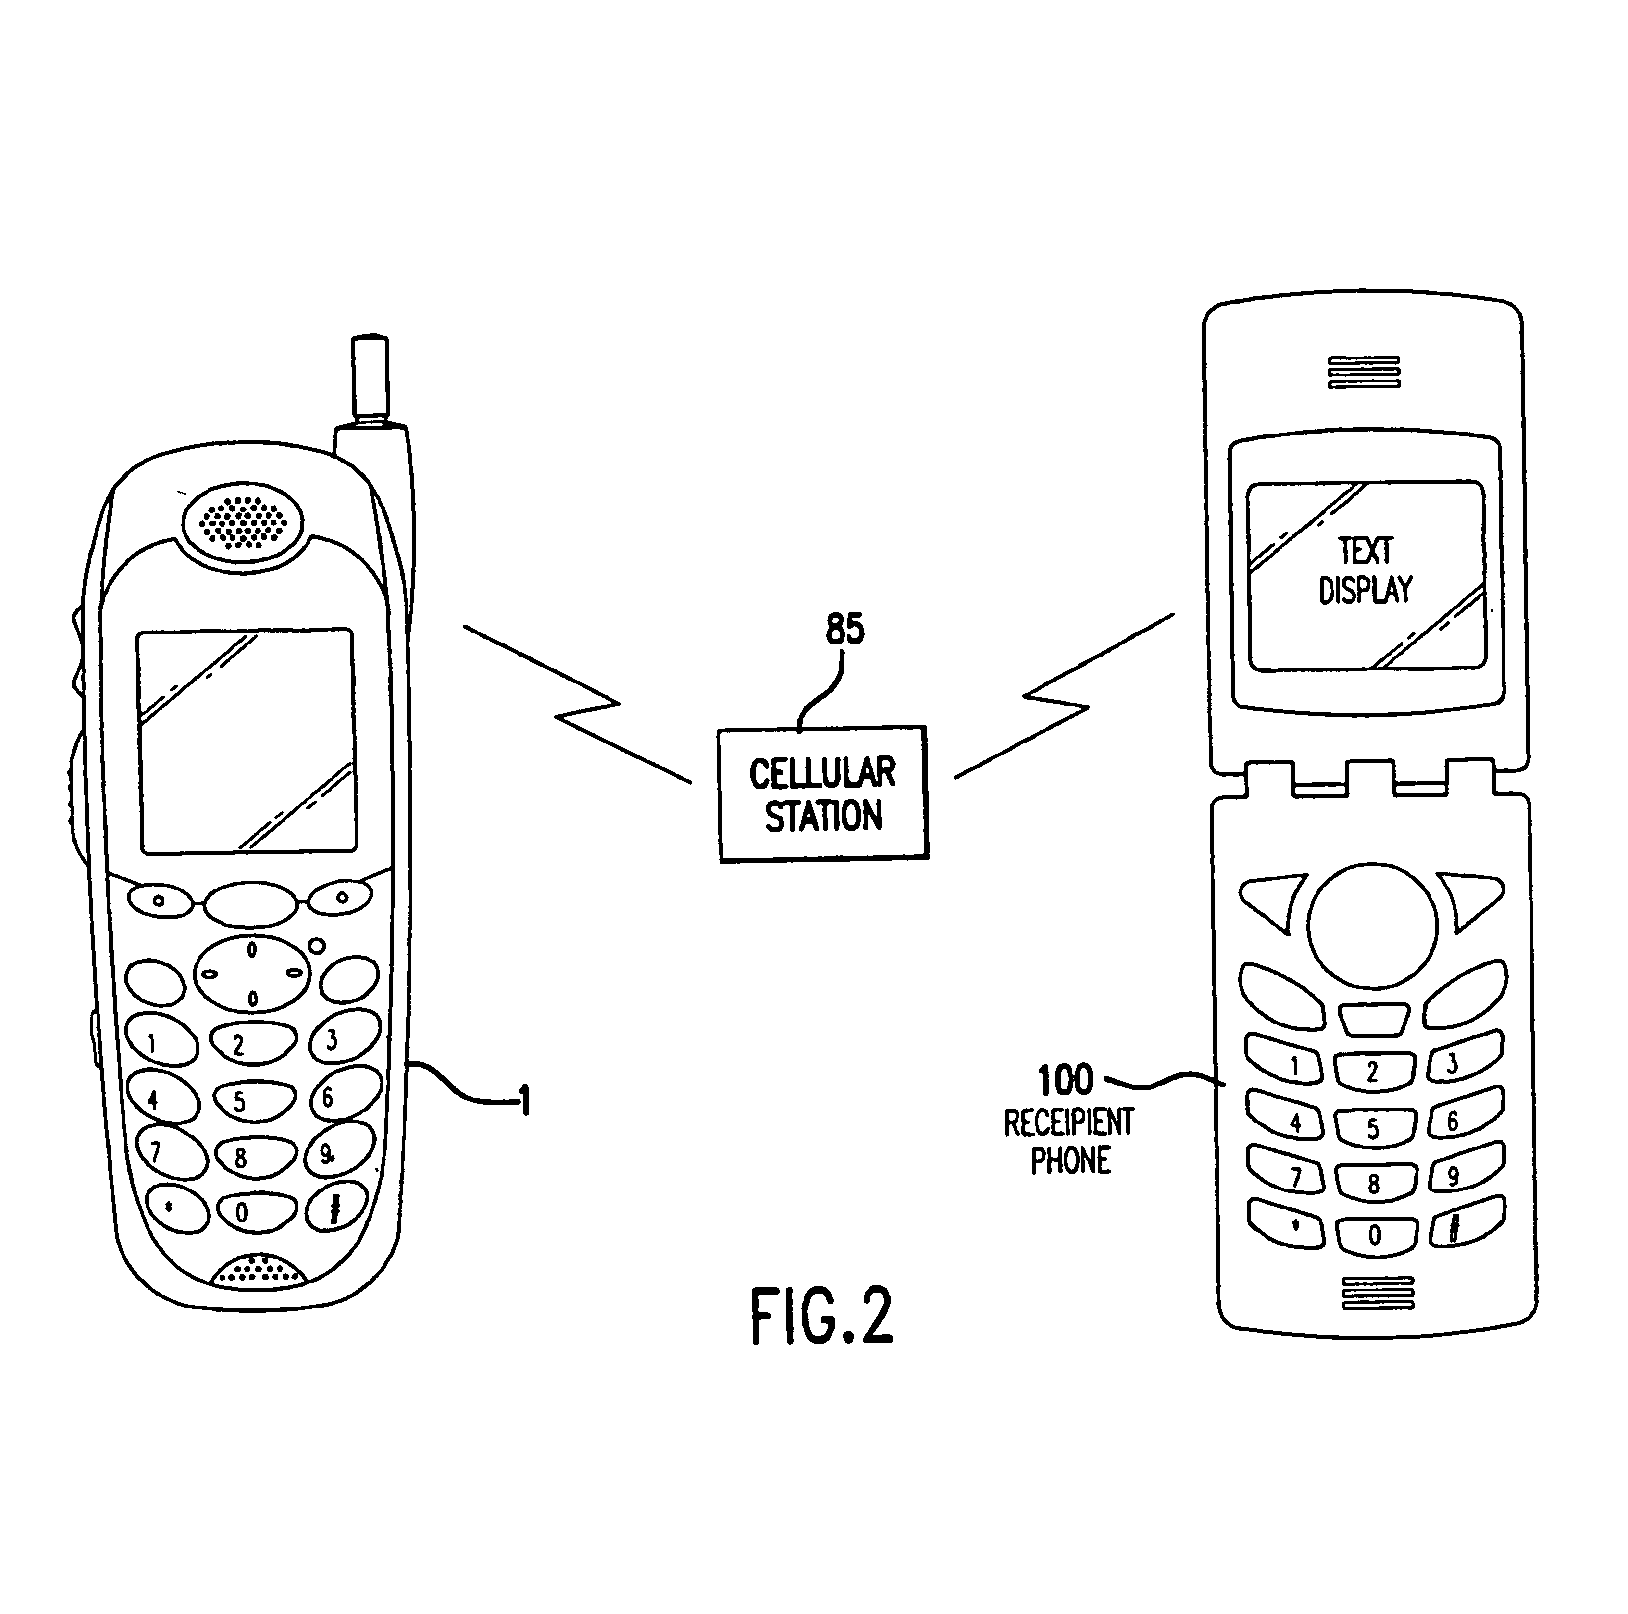 Voice to text messaging system and method